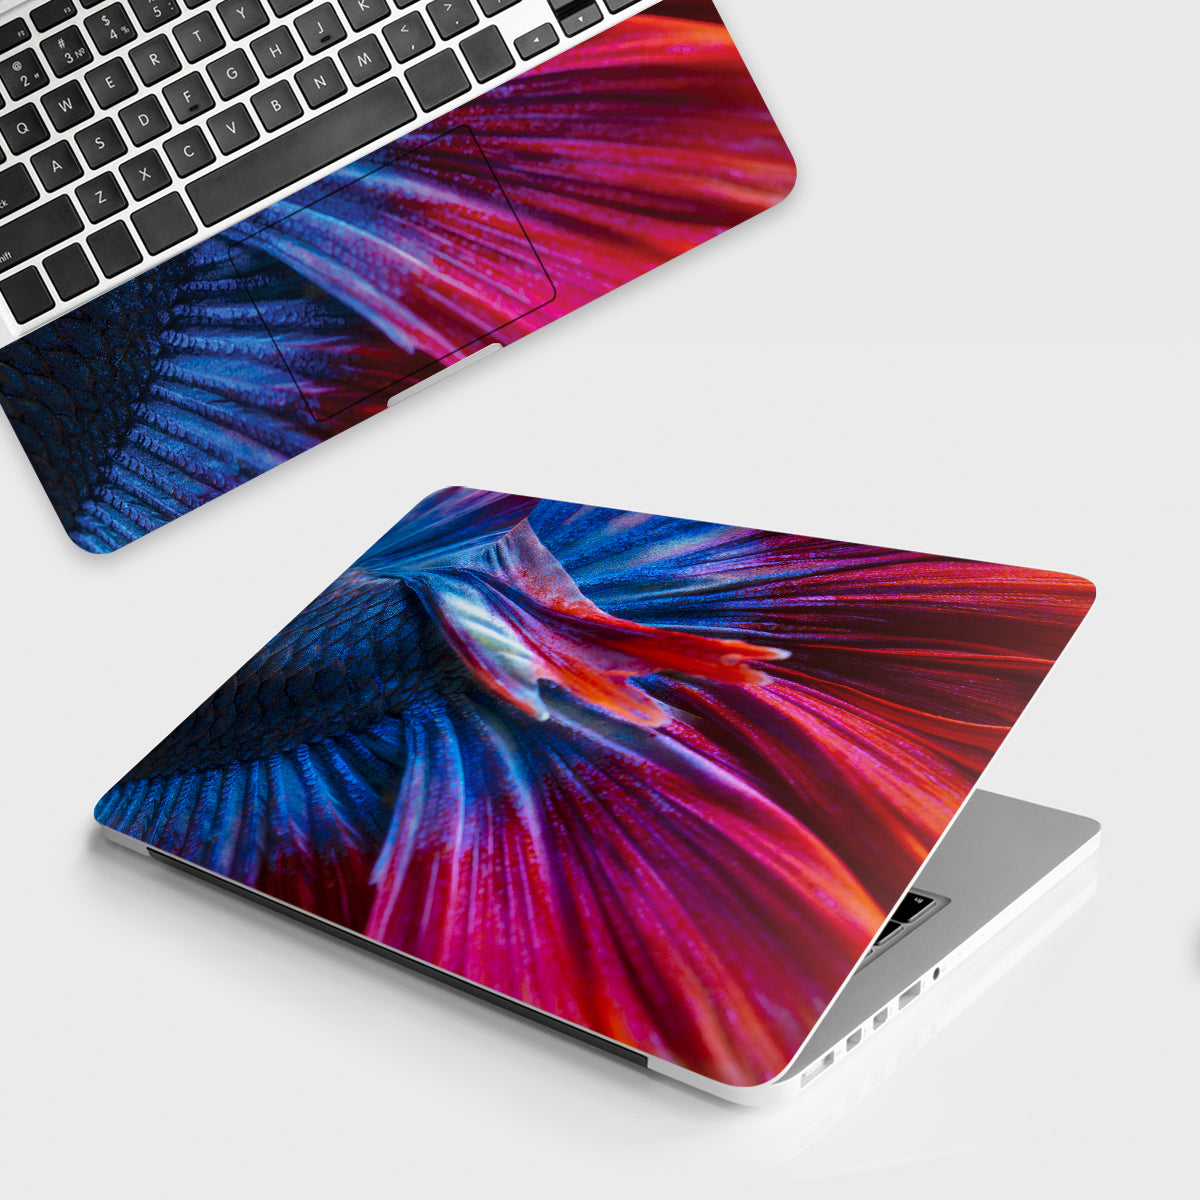 Fomo Store Laptop Skins Abstract Fish Tail